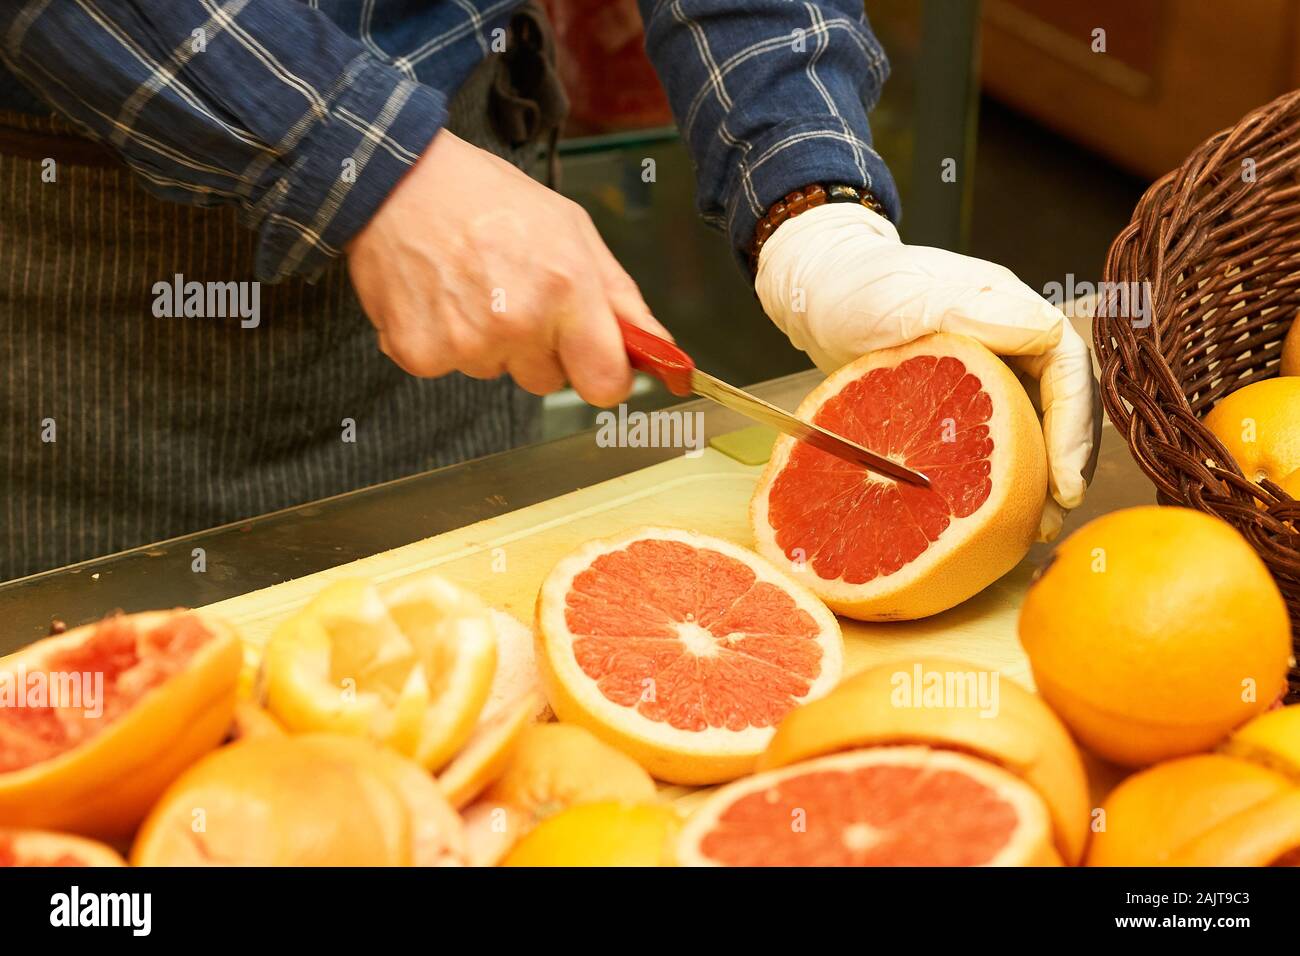 A chef cuts pink fleshed grapefruits (Citrus × paradisi) in half for use in smoothies at a food stall in Gwangjang Market in Seoul, South Korea. Stock Photo